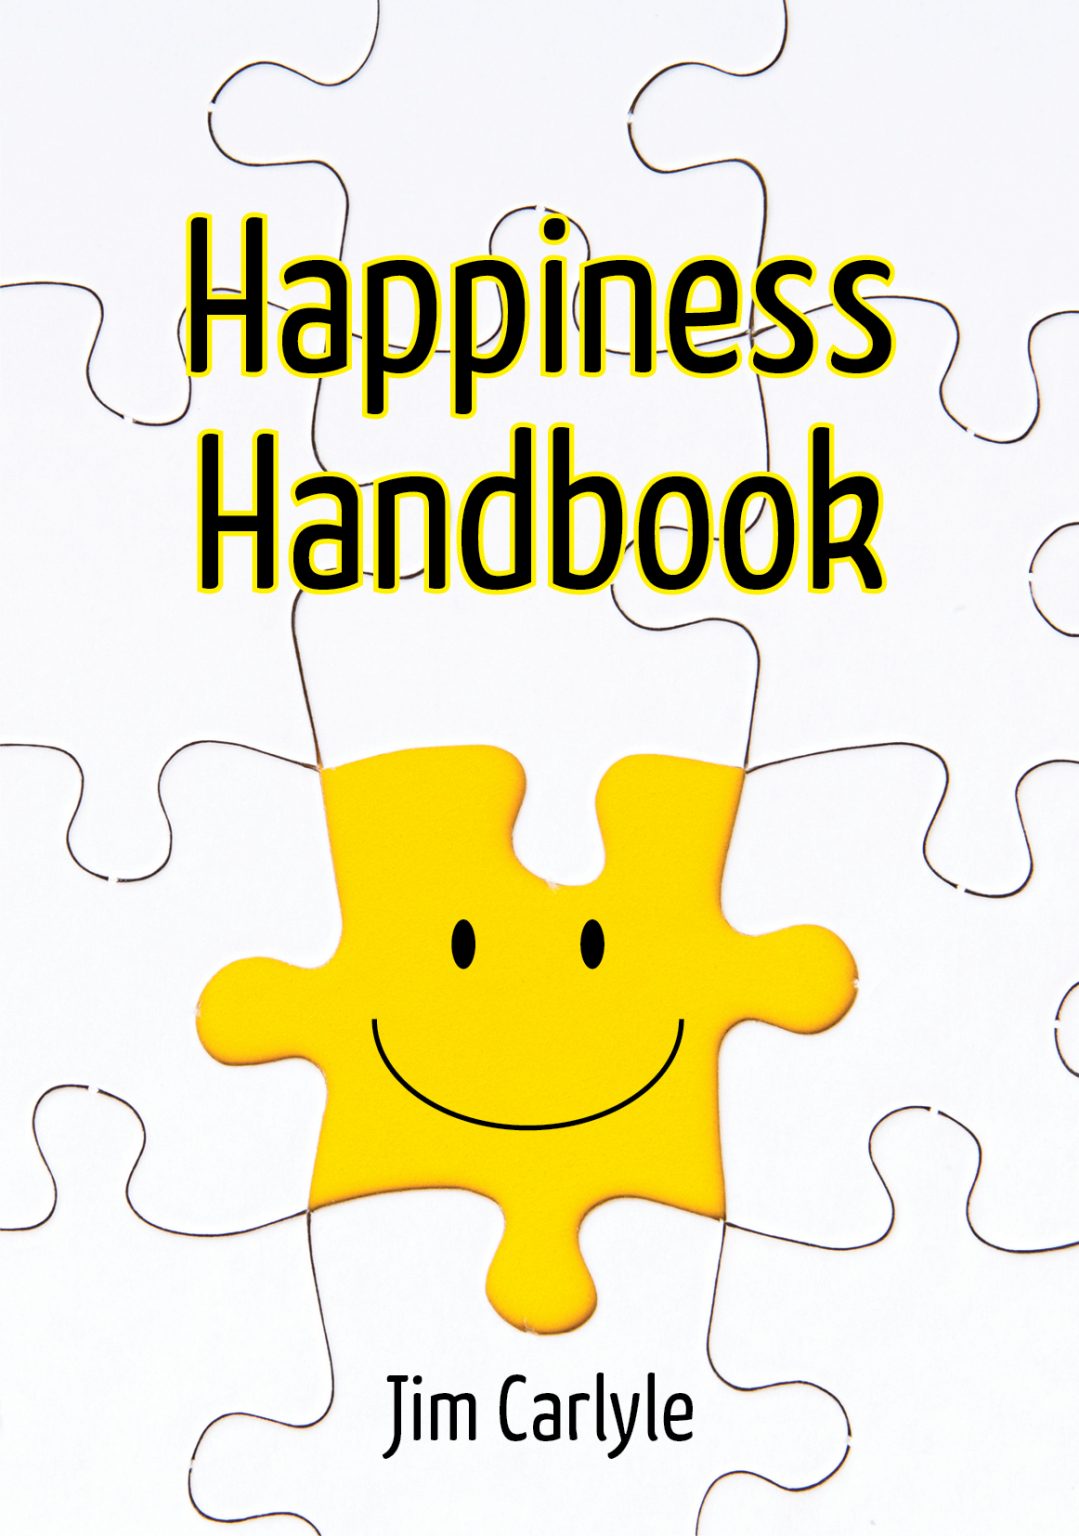 research on happiness books